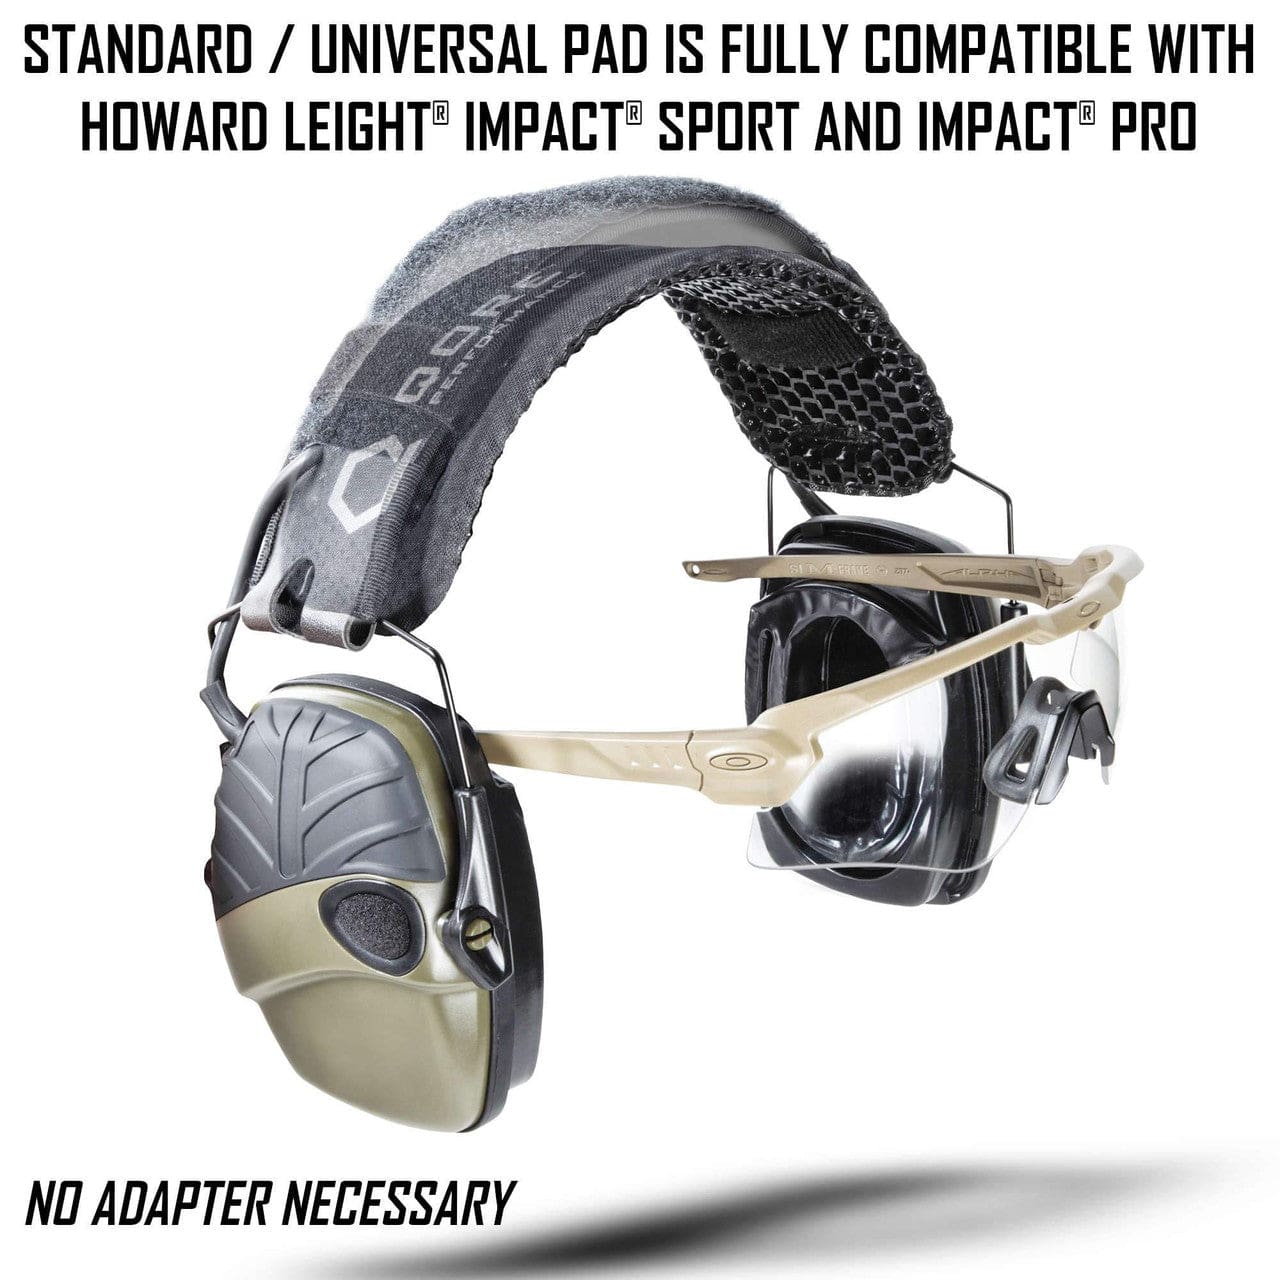 Standard Sightlines pad is fully compatible with Howard Leight Impact Sport and Impact Pro Headsets